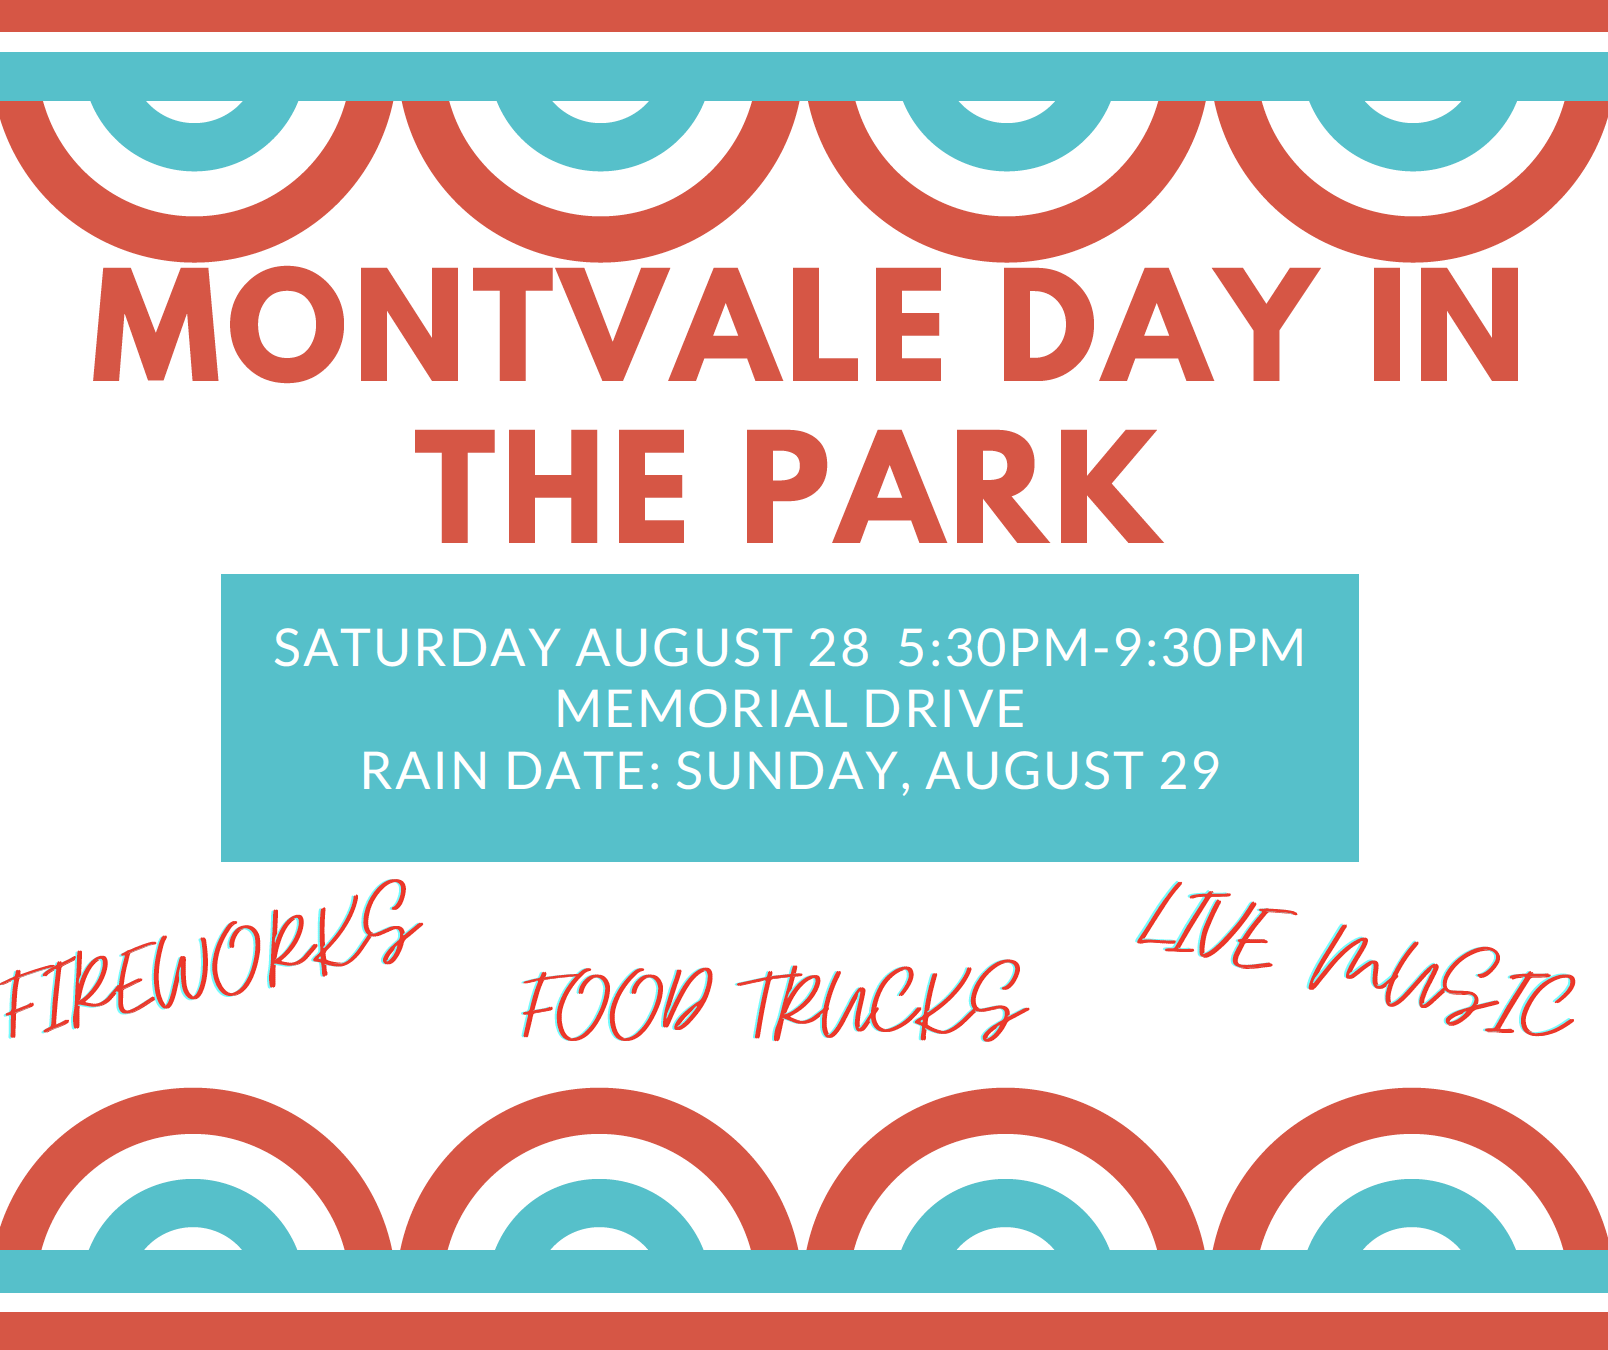 Montvale Day In The Park Flyer